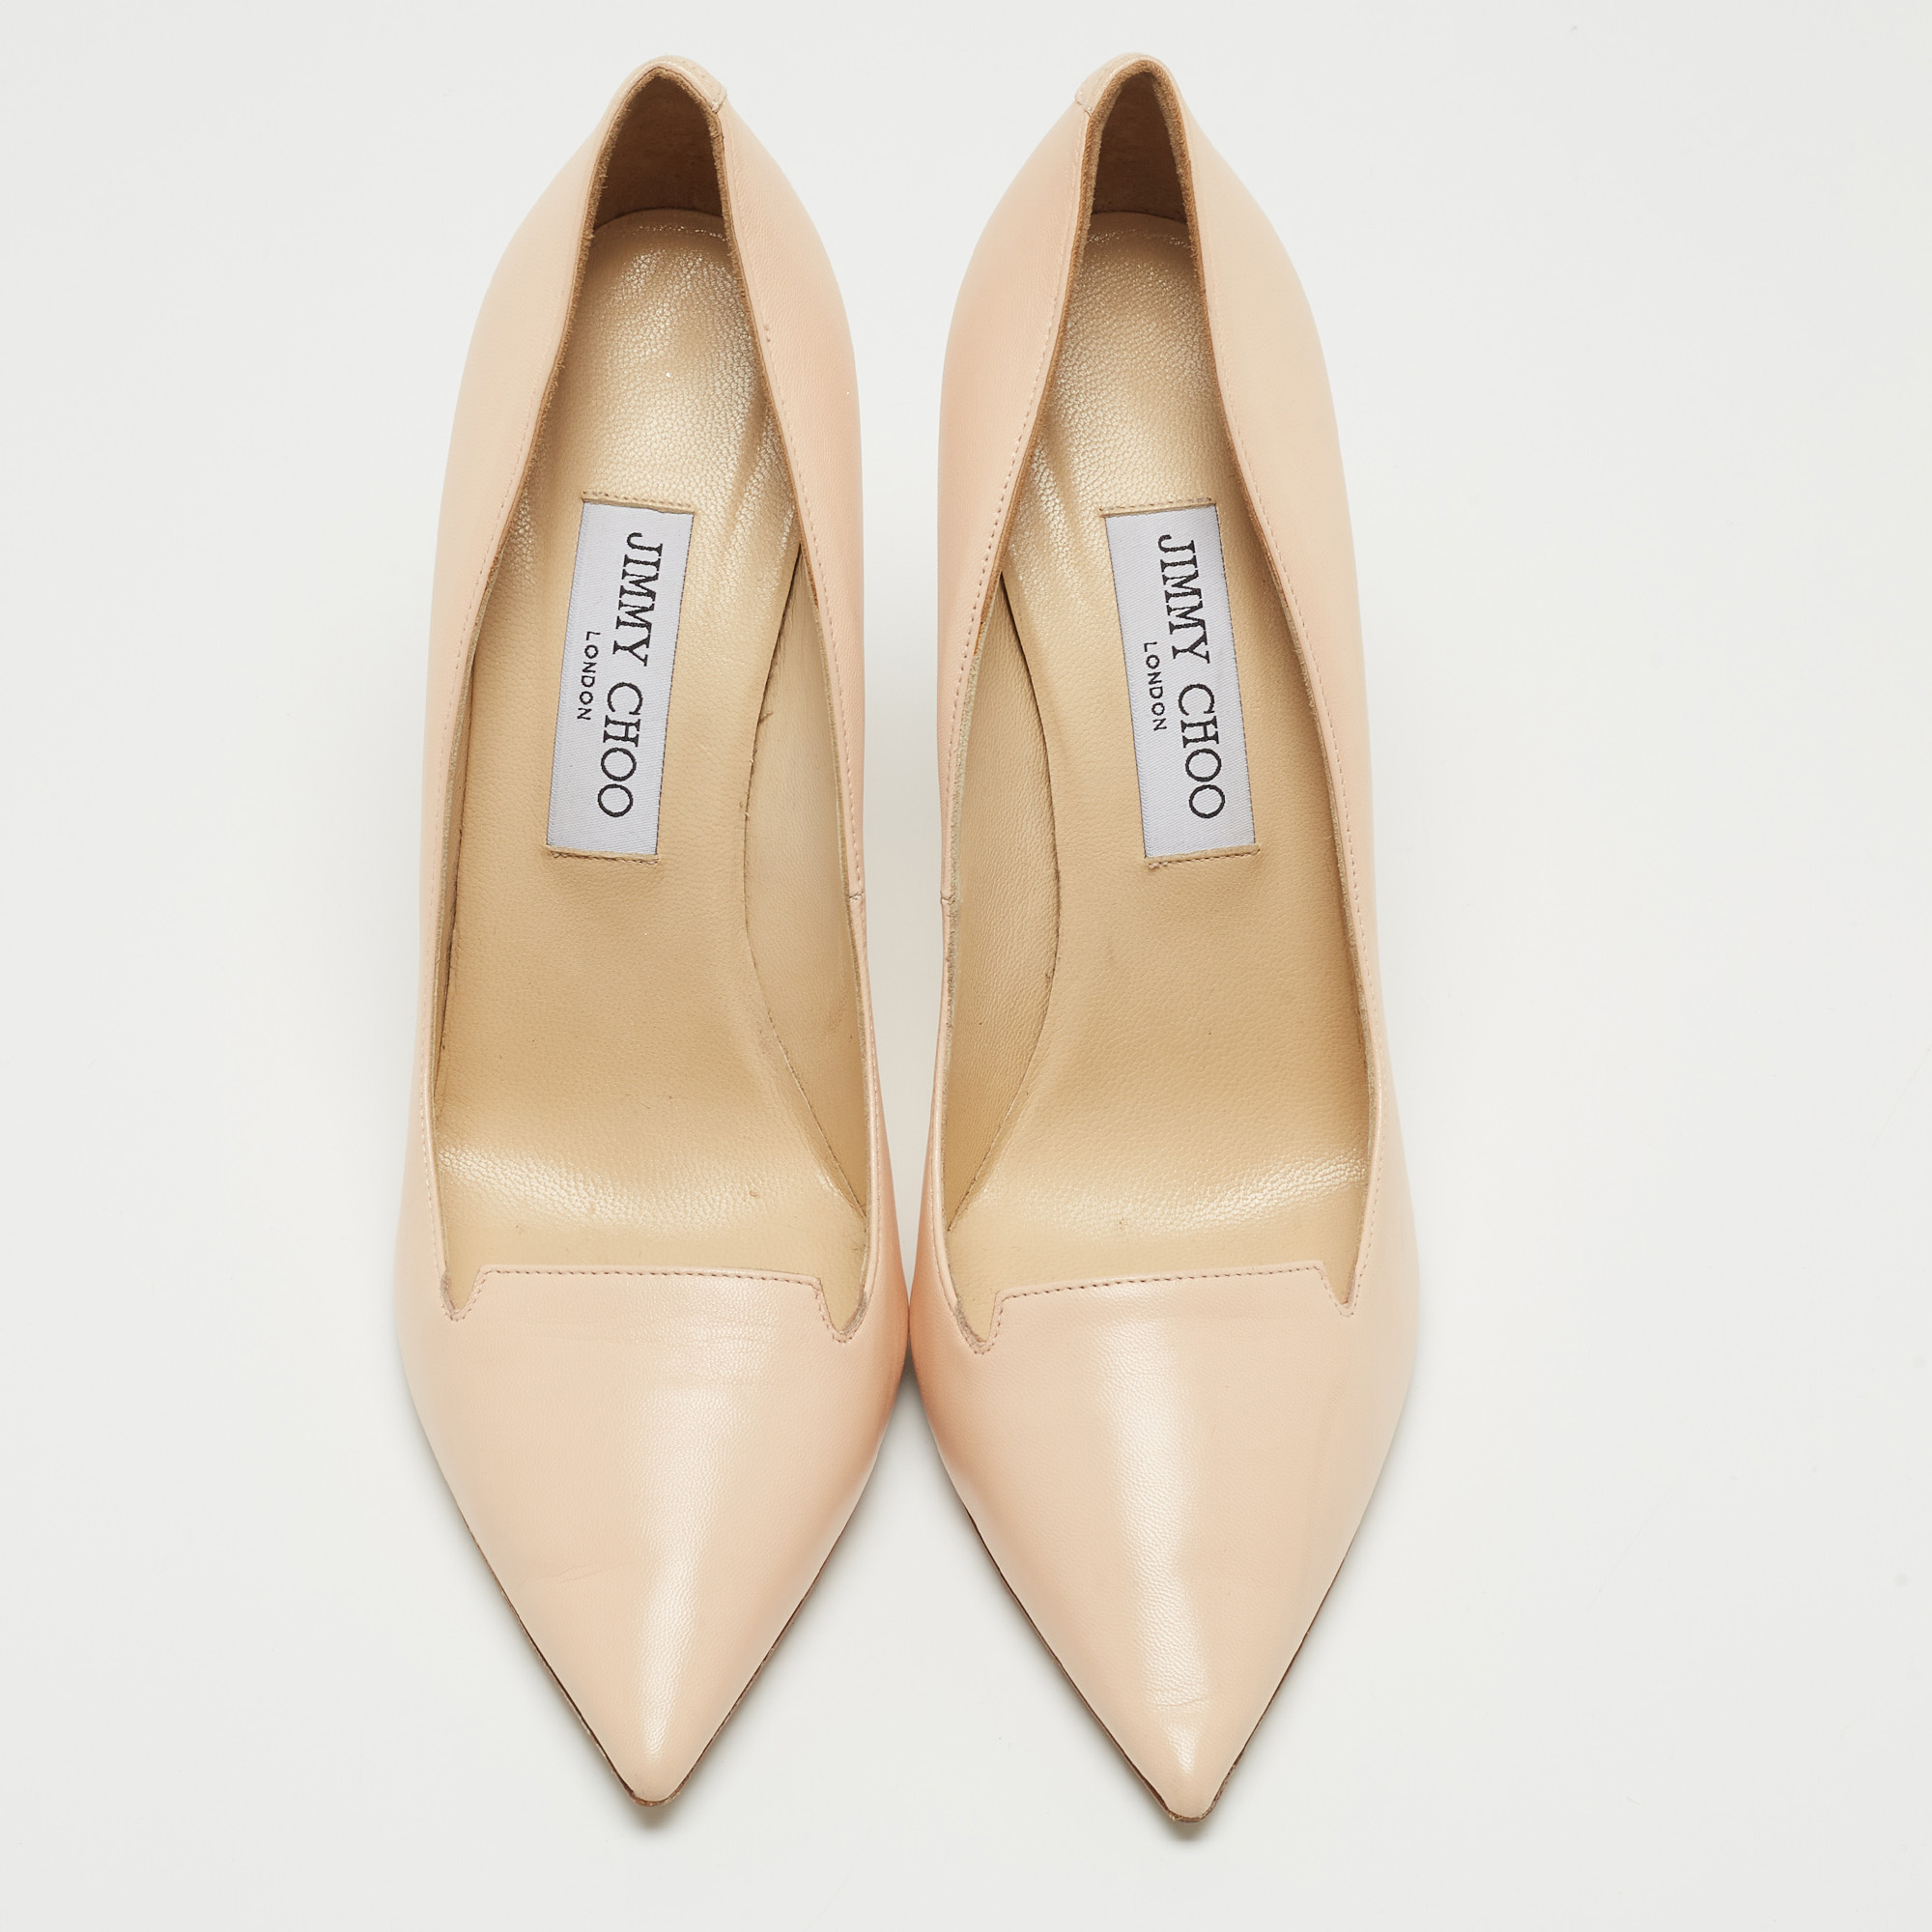 Jimmy Choo Beige Leather Pointed Toe Pumps Size 39